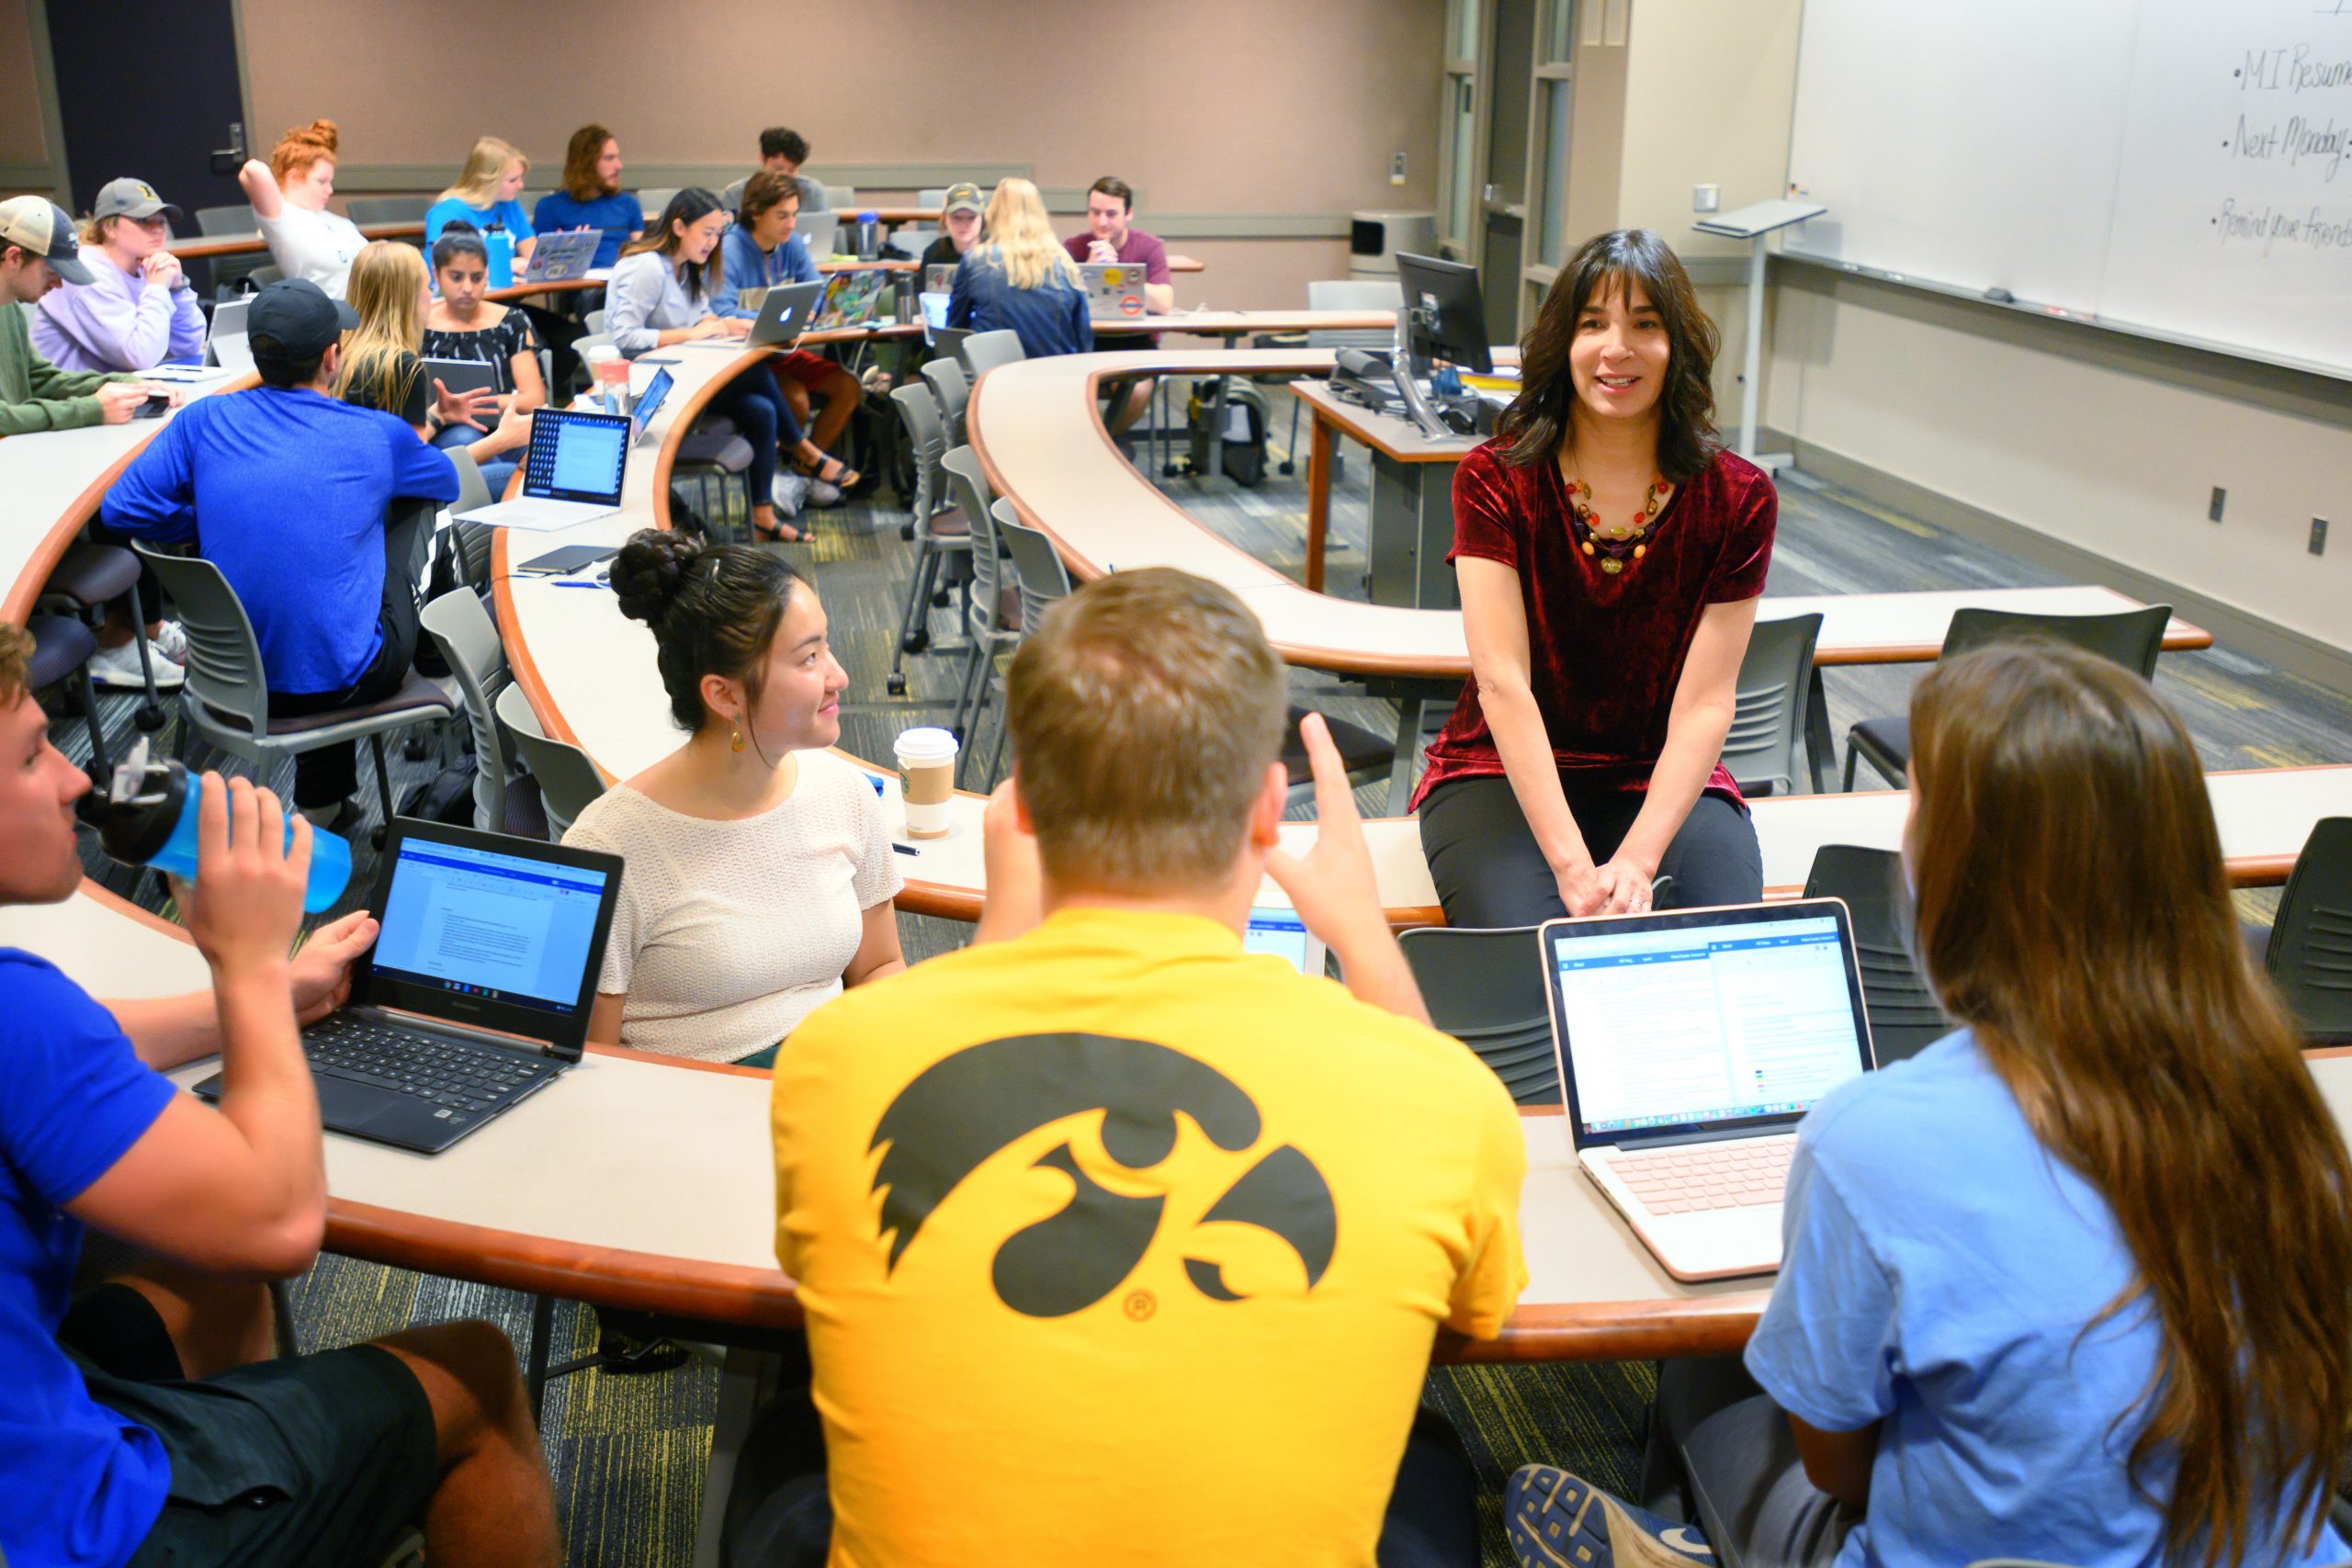 Associate Professor of Practice Peggy Stover interacting with a group of students in a marketing class in the Pappajohn Business Building.